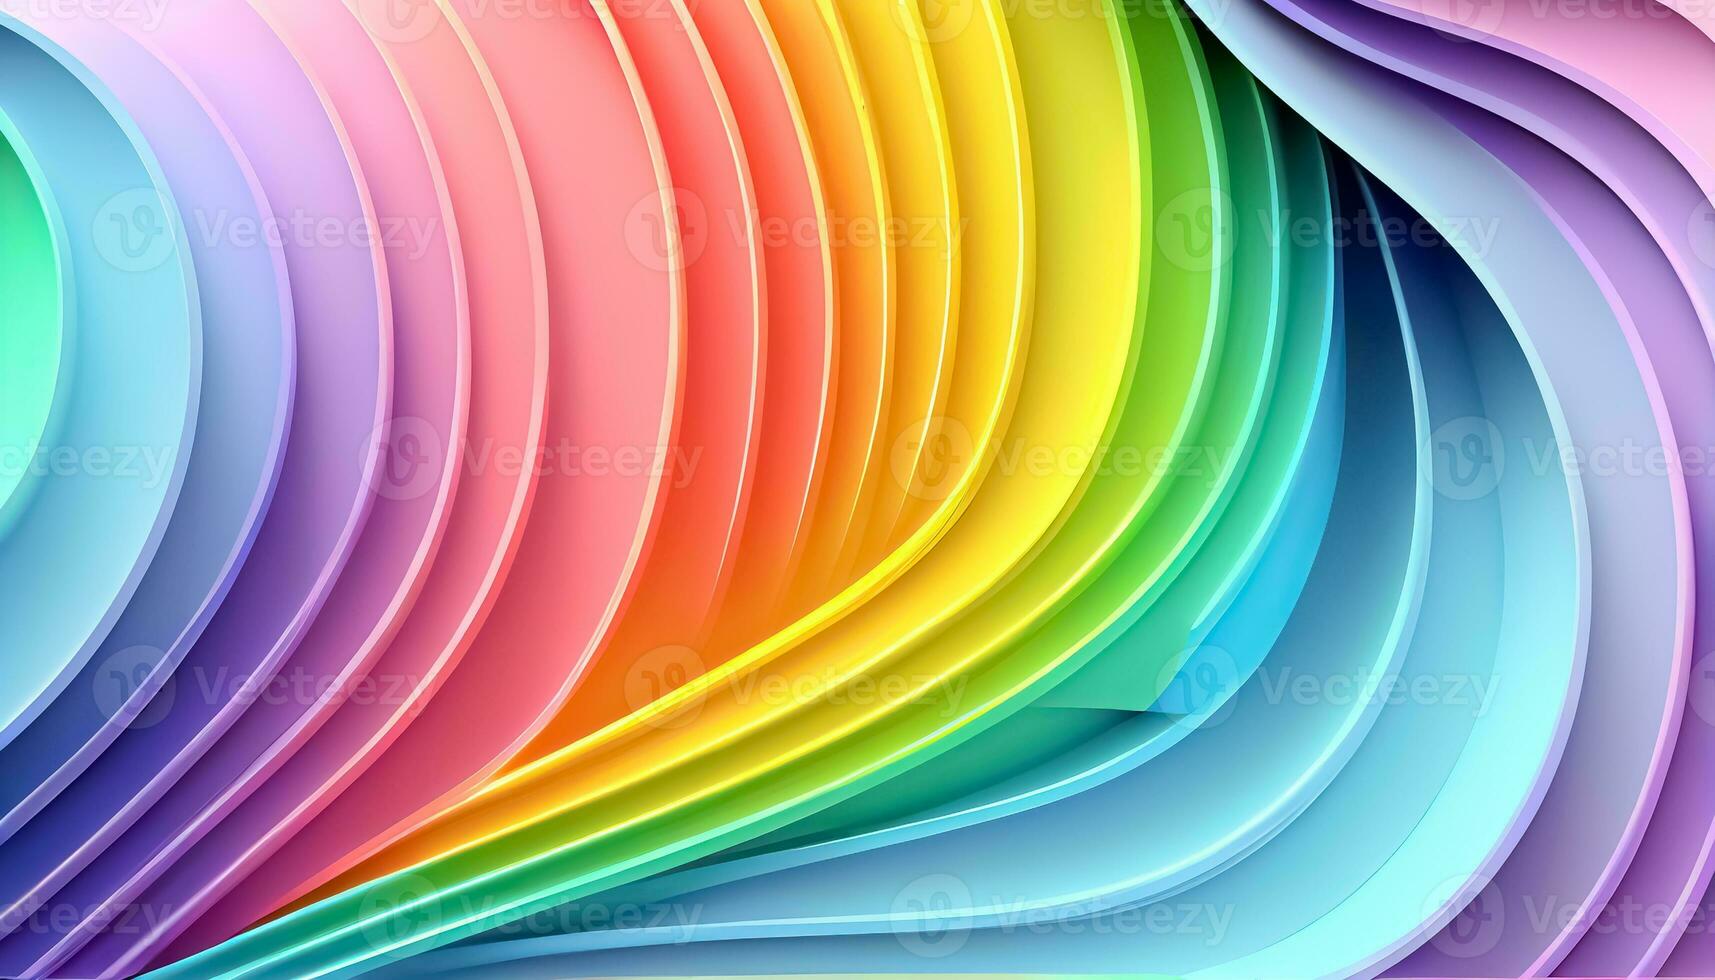 abstract colorful background with waves. abstract rainbow background. abstract background photo